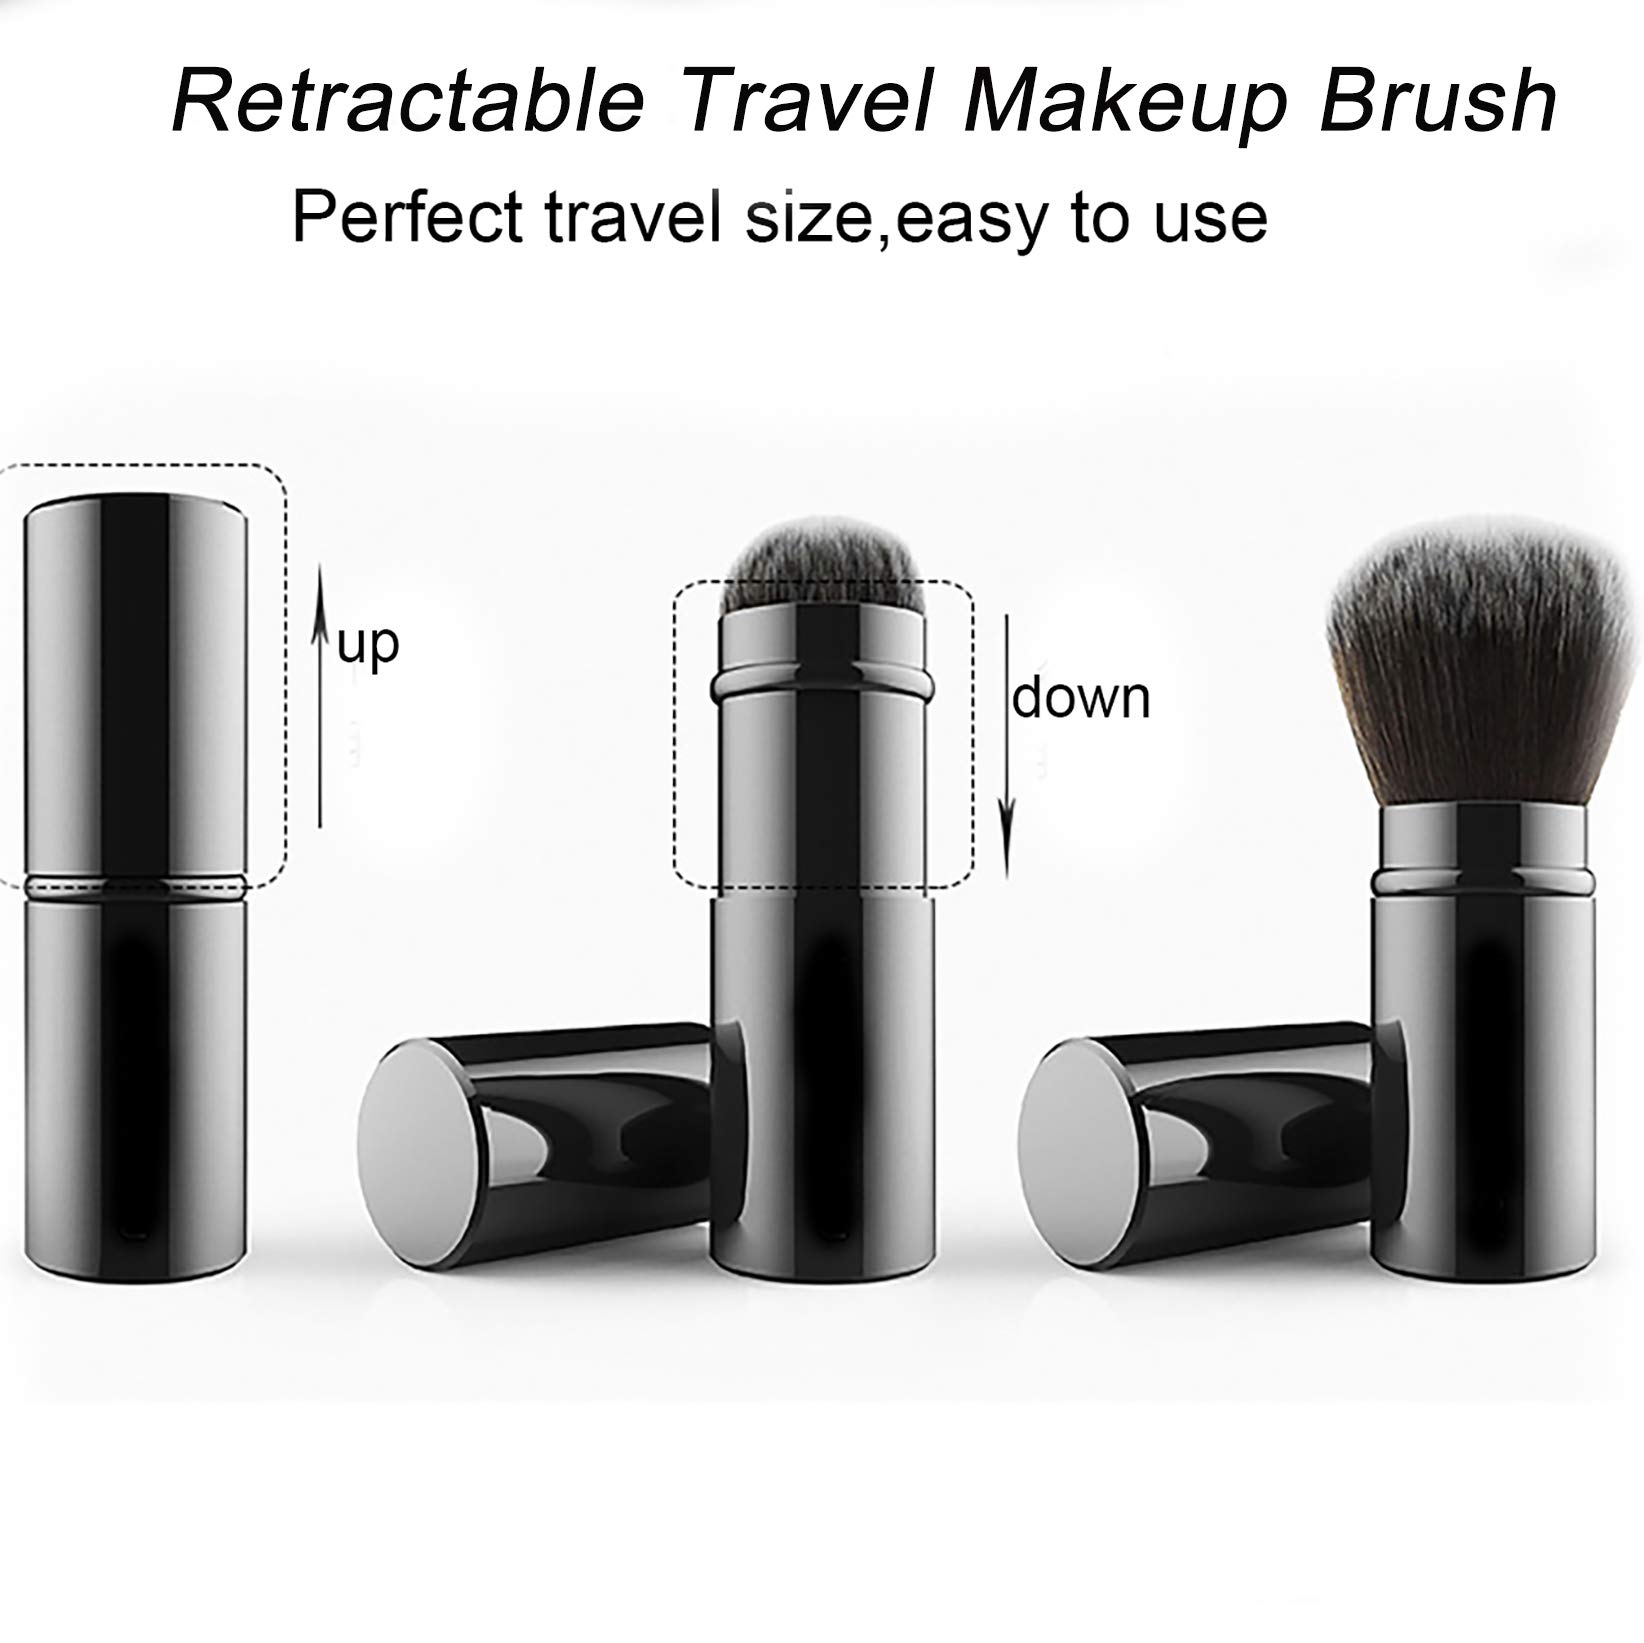 Falliny Retractable Kabuki Makeup Brushes, Travel Face Blush Brush, Portable Powder Foundation Sunscreen Brush with Cover for Blush, Bronzer, Buffing, Highlighter Flawless Powder Cosmetics